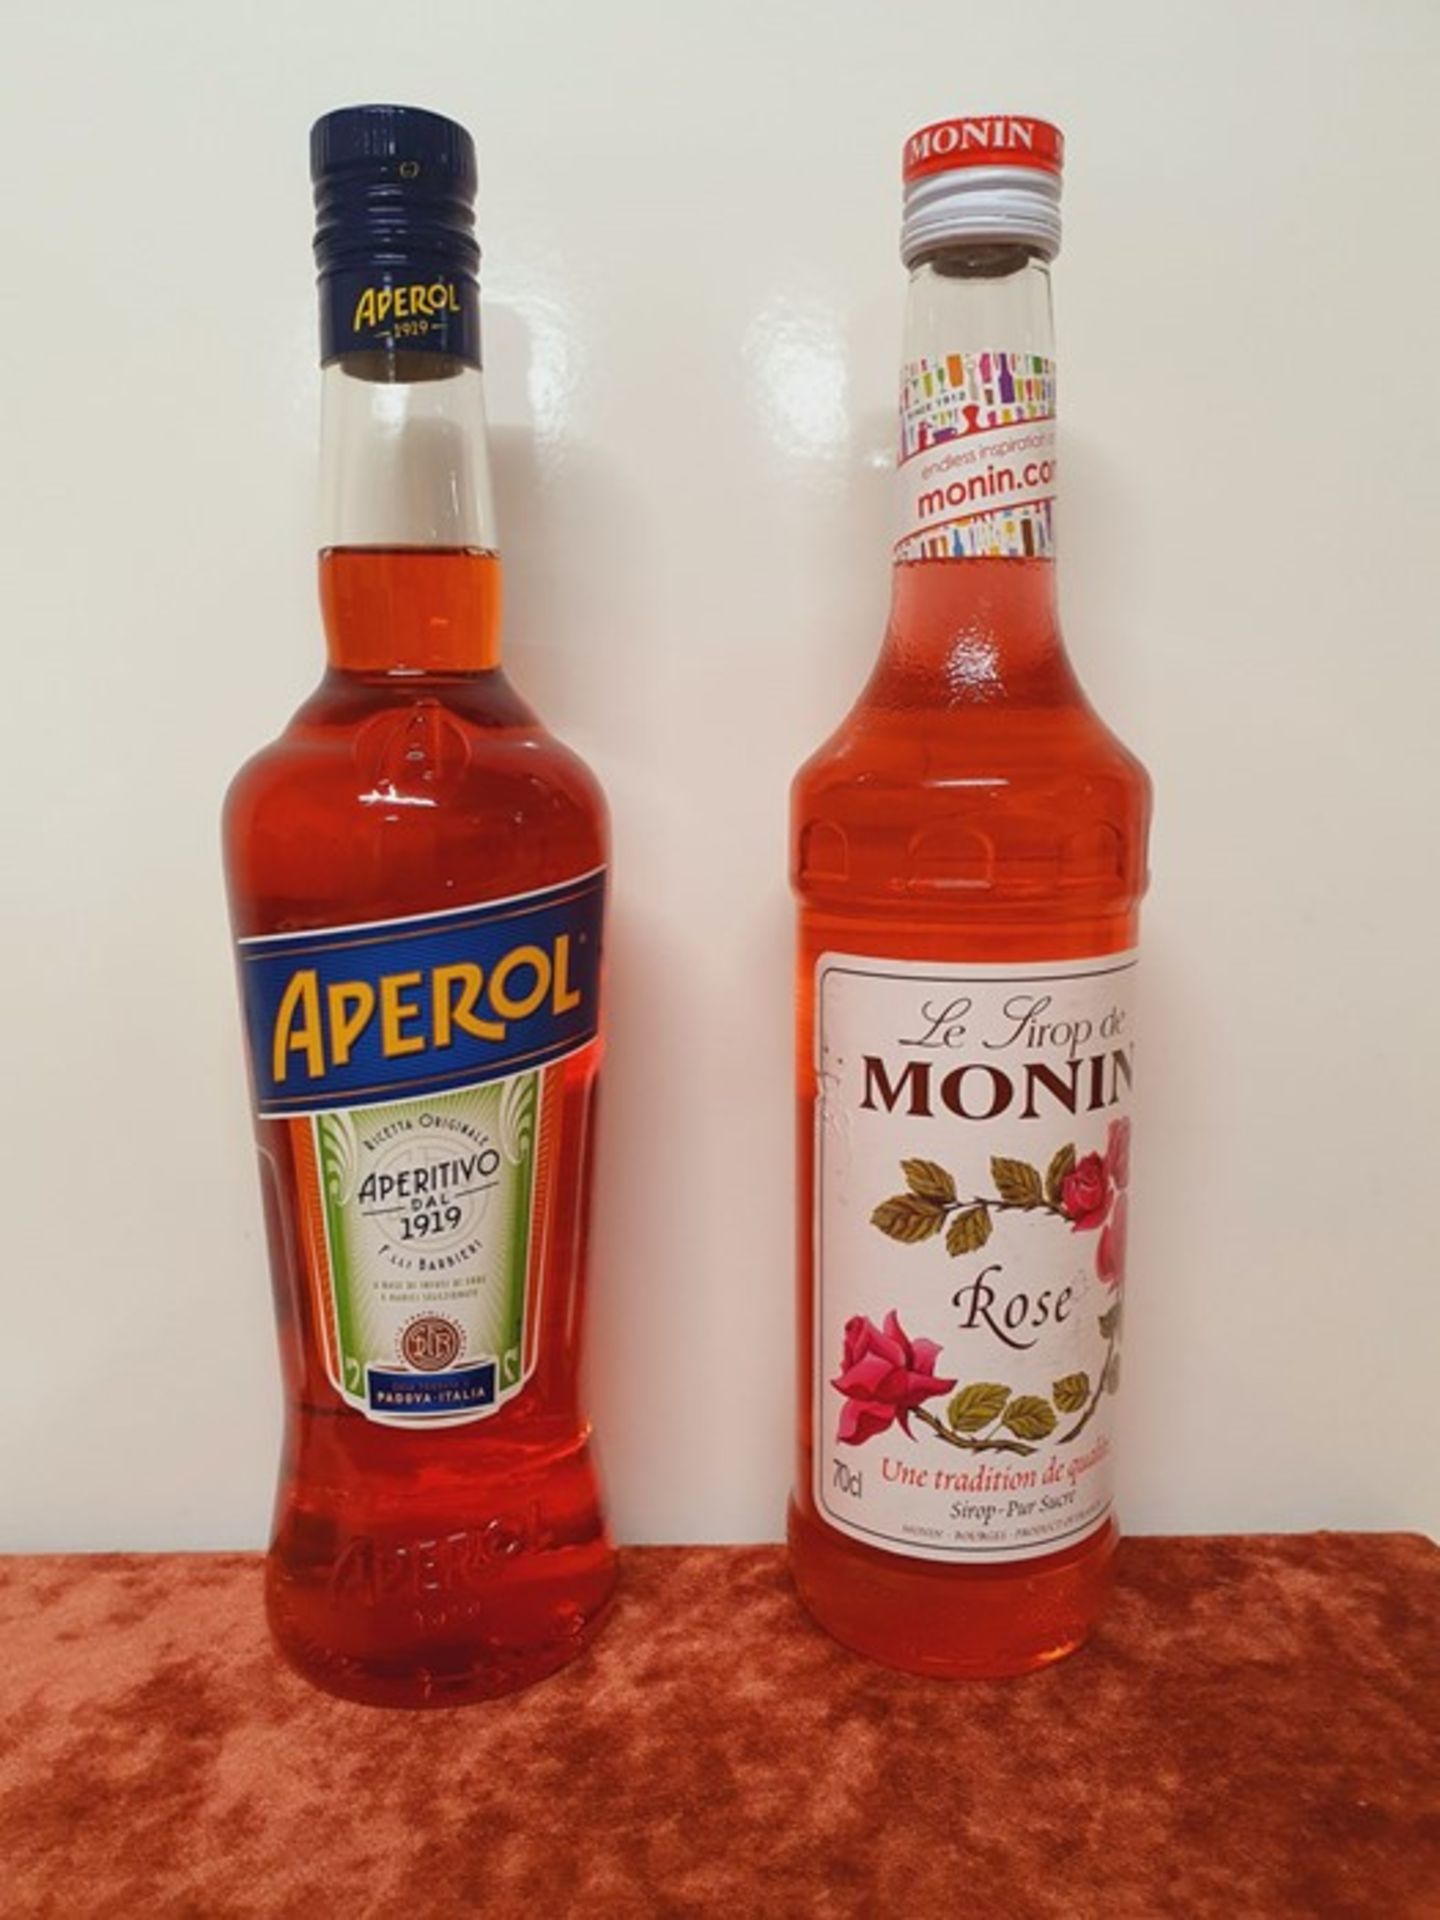 ONE LOT TO CONTAIN 1 x APEROL LIQUEUR 70CL / 1 x MONIN SYRUP ROSE 70CL